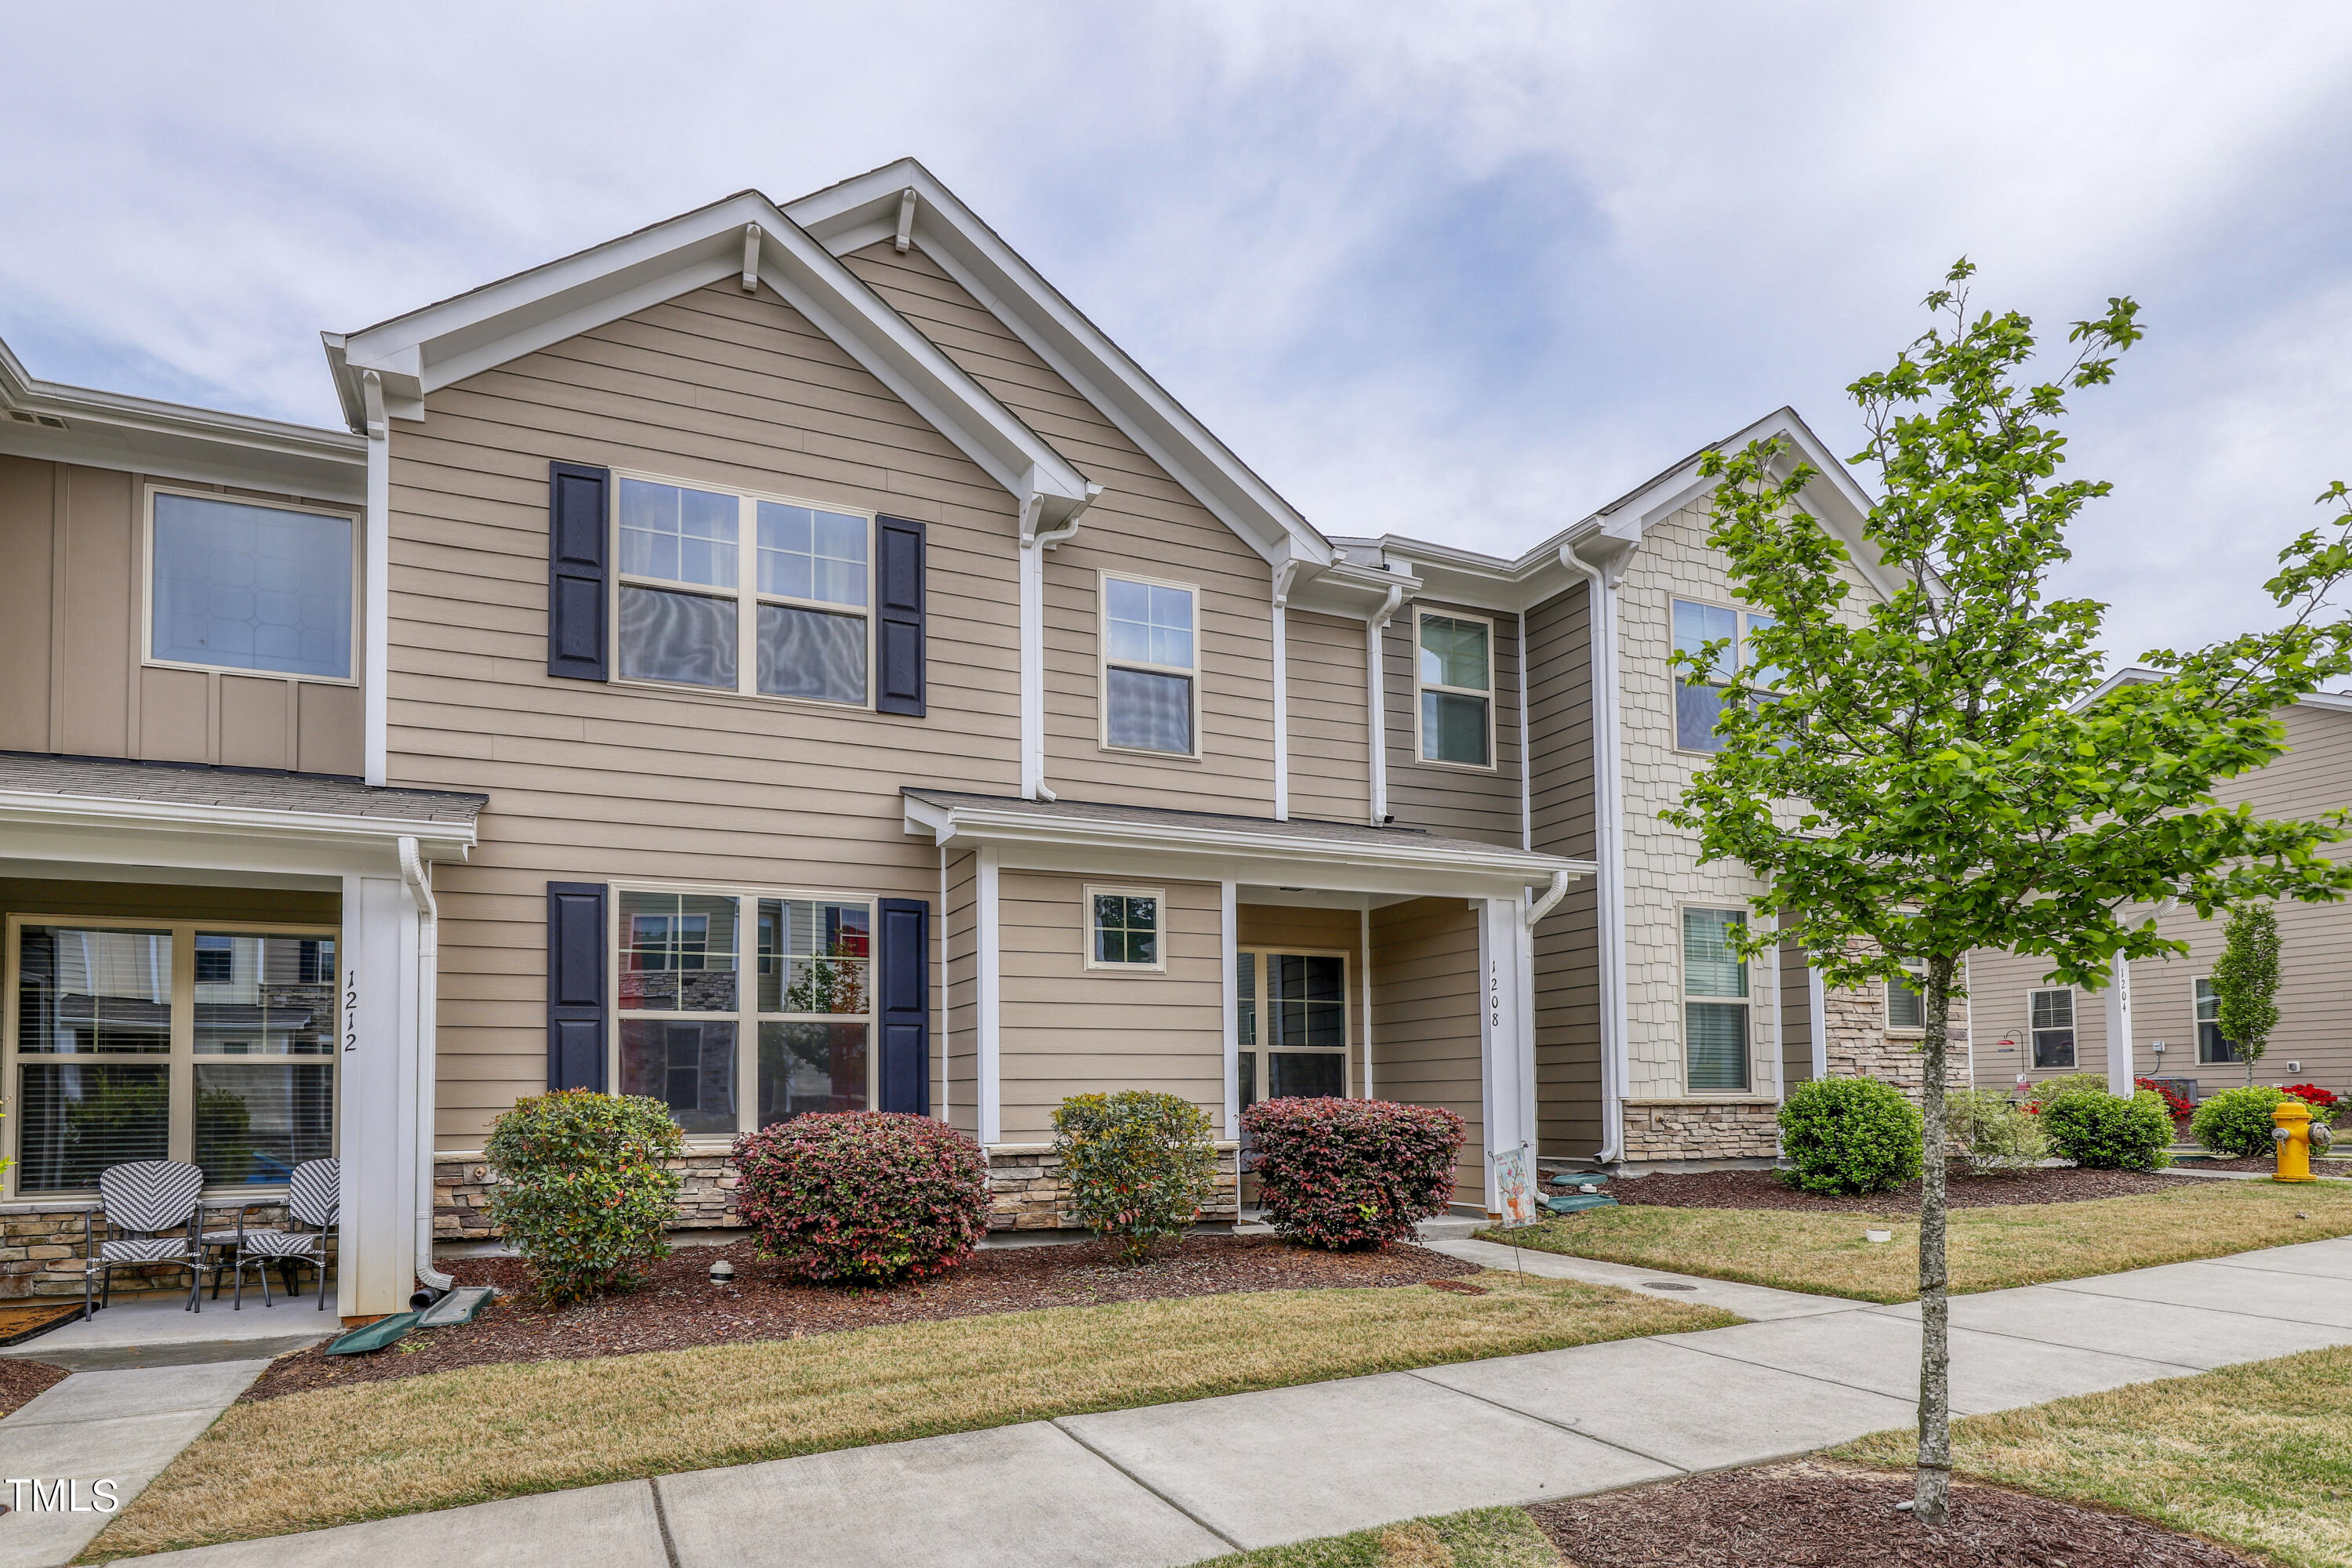 View Wake Forest, NC 27587 townhome